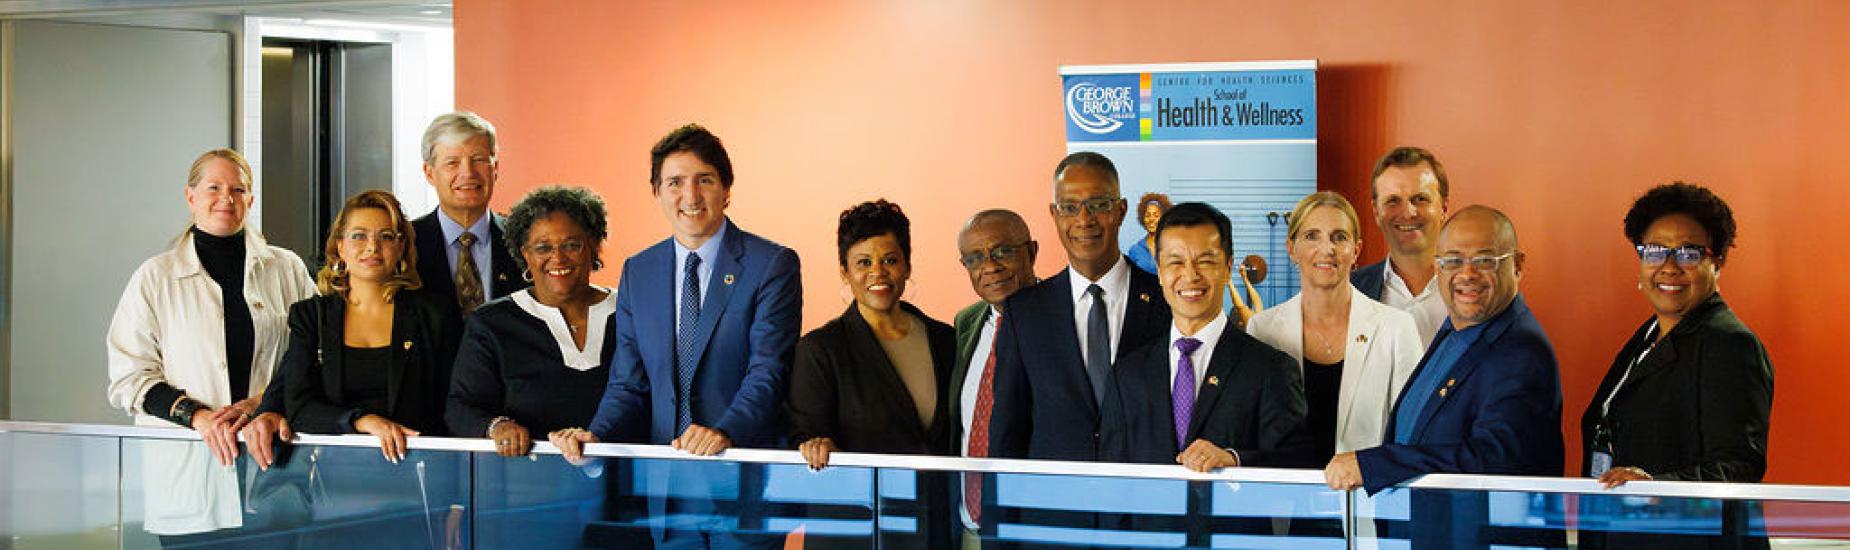 George Brown College senior leaders with Prime Ministers Justin Trudeau and Mia Mottley